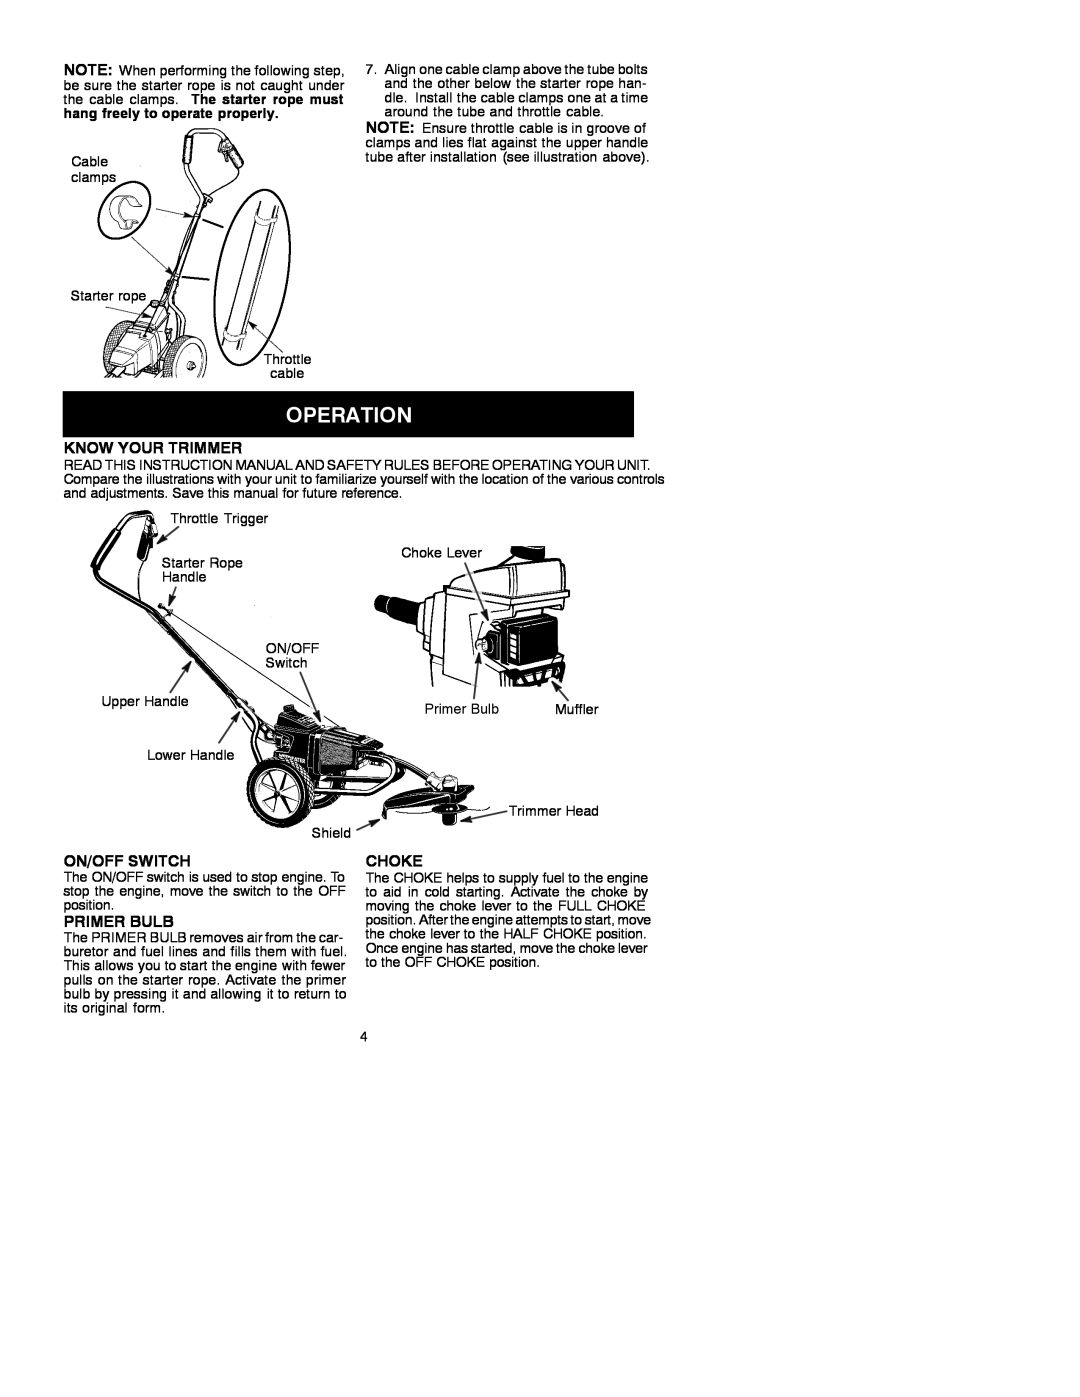 Weed Eater WT300, 530088156 instruction manual Know Your Trimmer, On/Off Switch, Primer Bulb, Choke 